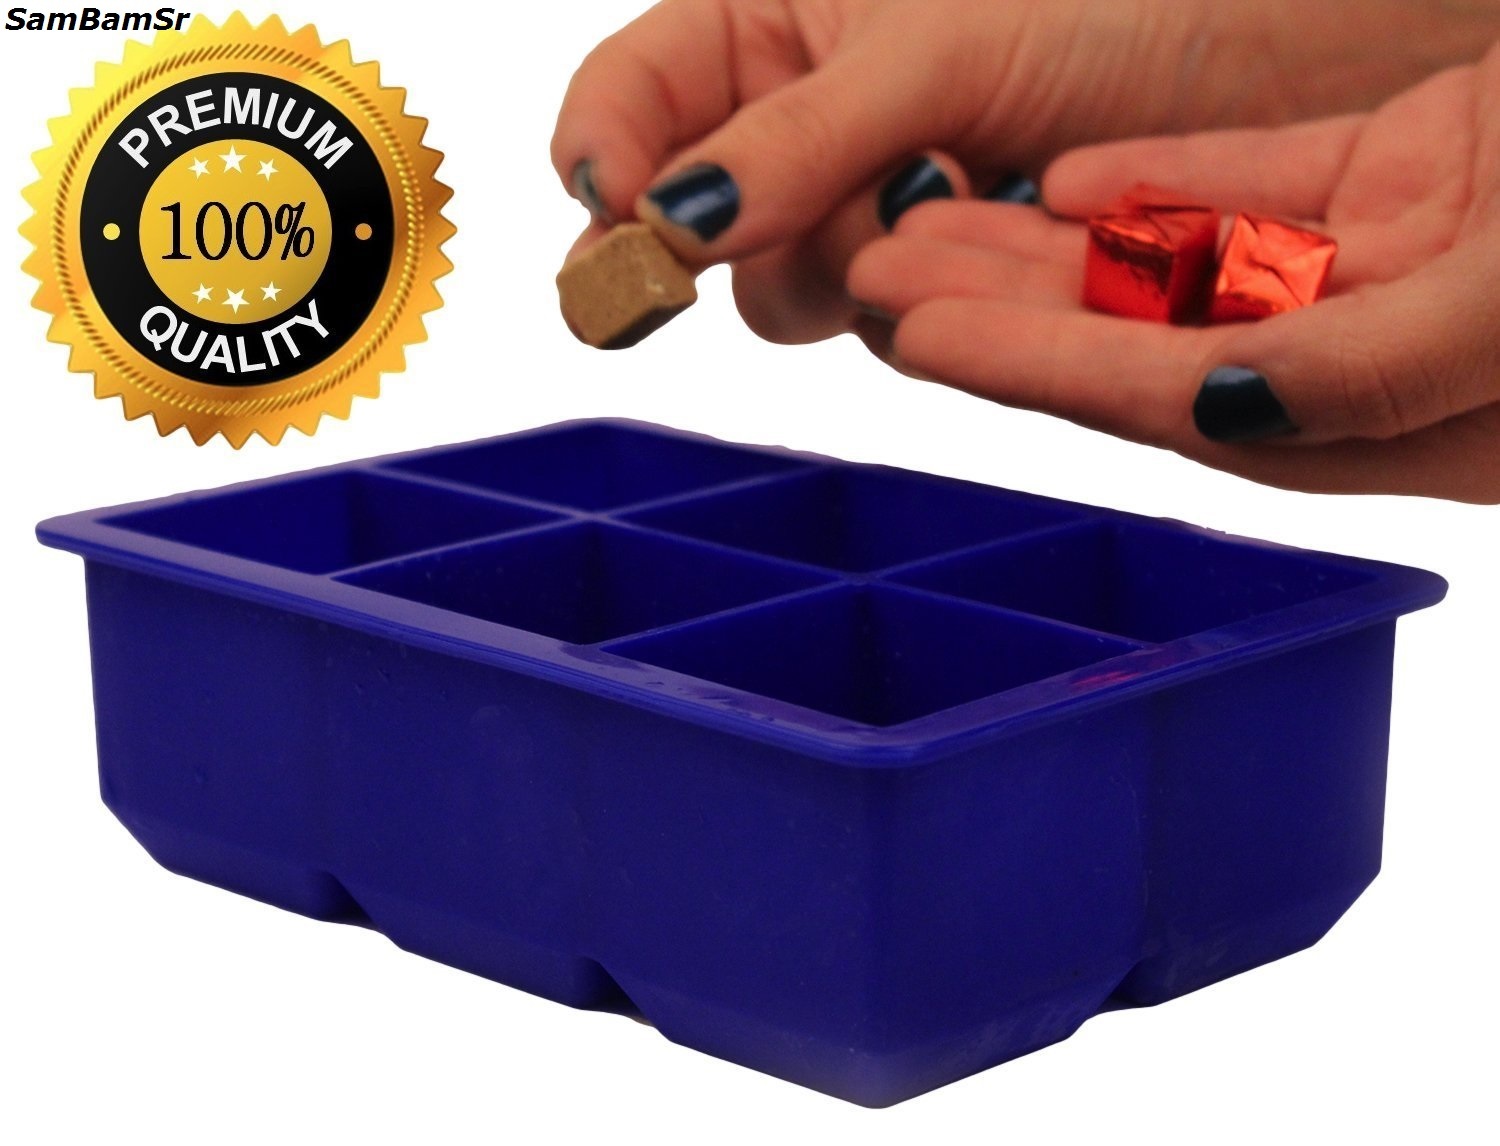 Extra Large Silicone IceCube Tray,Kitchen,Room, Freeze,Gadget,Utensil,Mold, Gift - $18.49